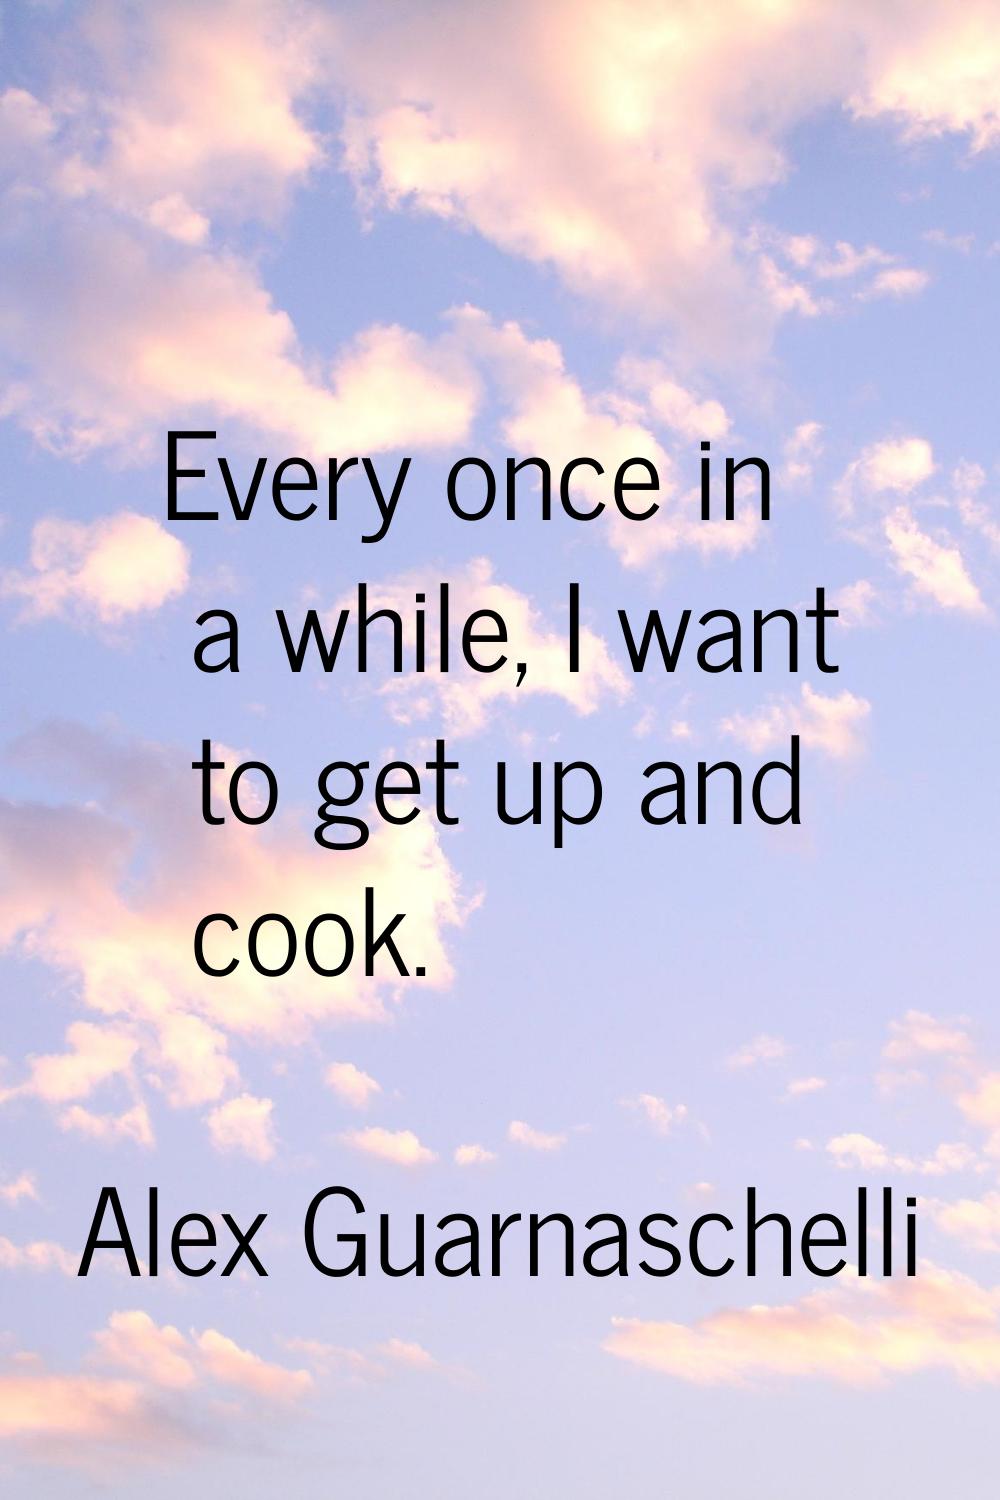 Every once in a while, I want to get up and cook.